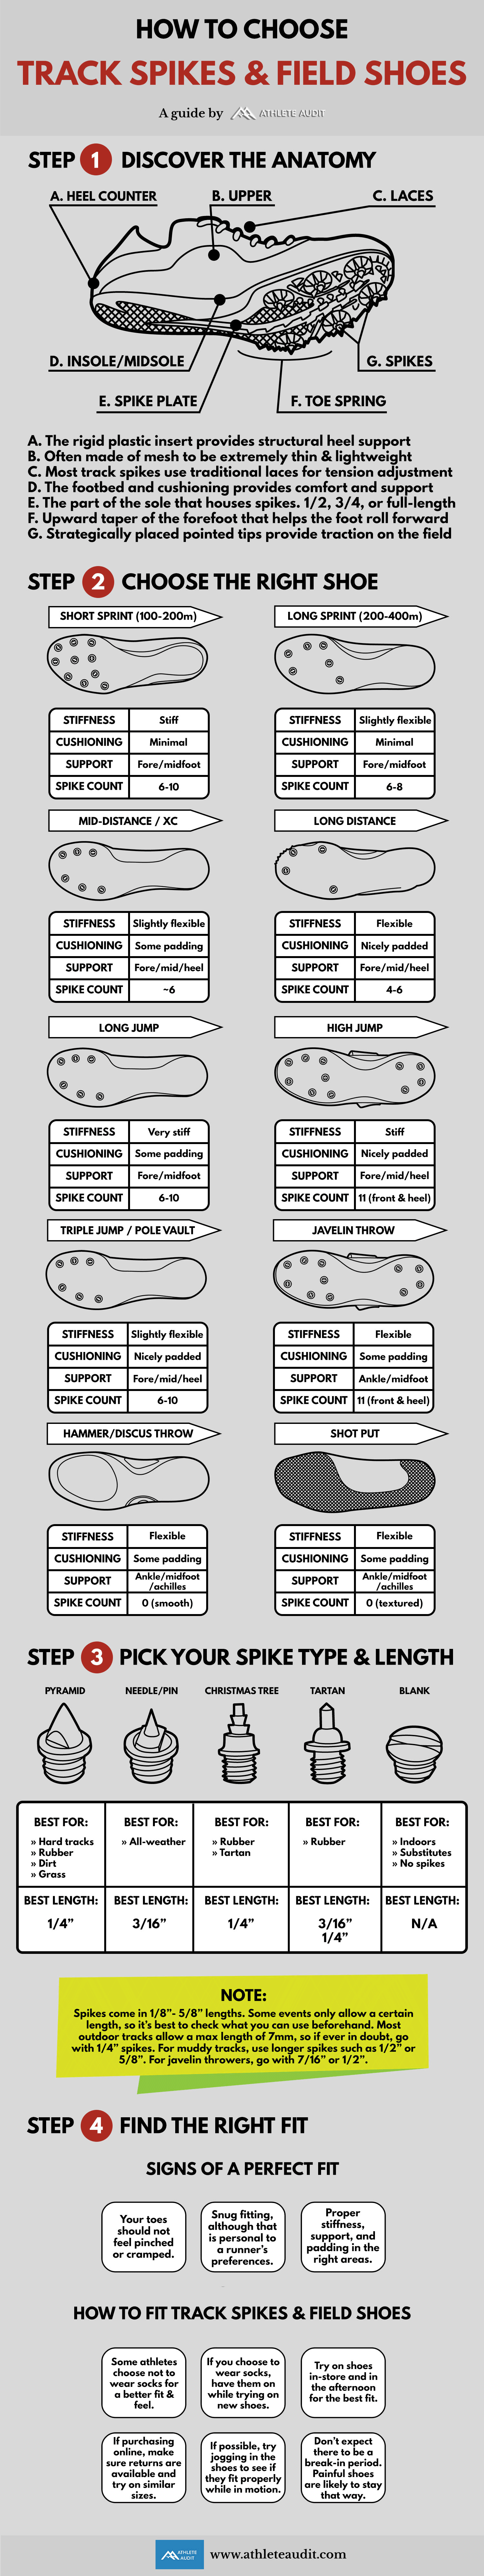 How To Choose Track Spikes and Field Shoes